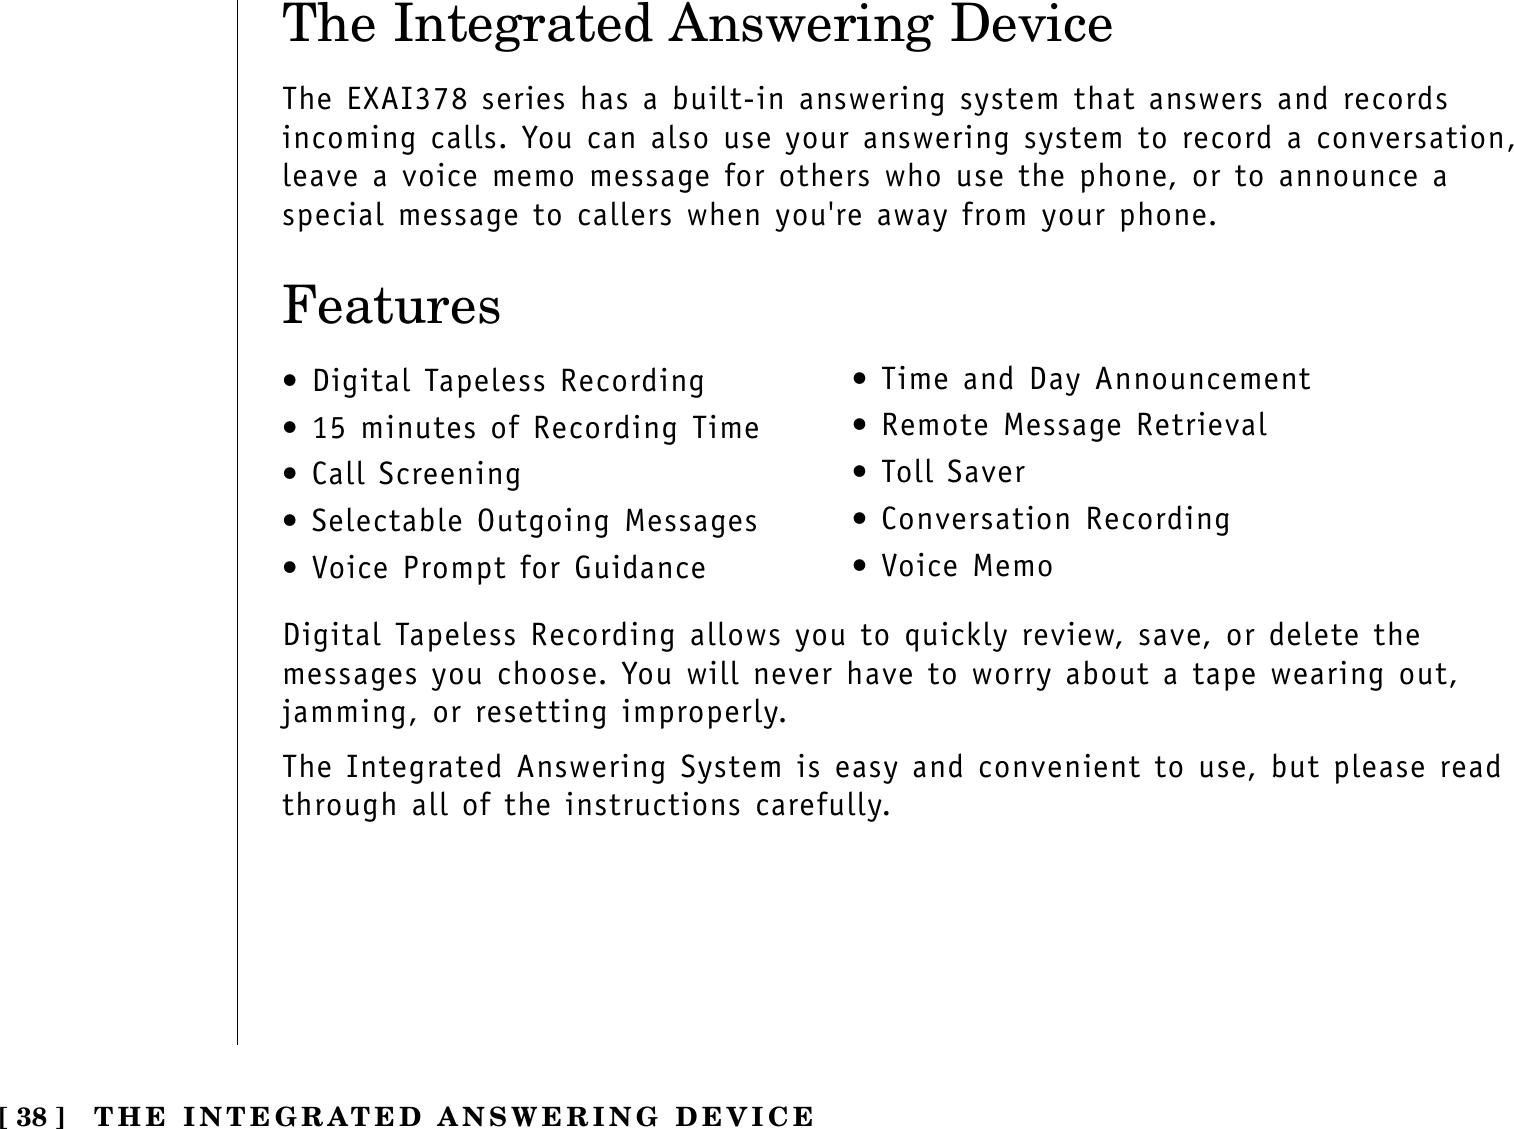 The Integrated Answering DeviceThe EXAI378 series has a built-in answering system that answers and recordsincoming calls. You can also use your answering system to record a conversation,leave a voice memo message for others who use the phone, or to announce aspecial message to callers when you&apos;re away from your phone.Features•Digital Tapeless Recording•15 minutes of Recording Time•Call Screening•Selectable Outgoing Messages•Voice Prompt for Guidance•Time and Day Announcement•Remote Message Retrieval•Toll Saver•Conversation Recording•Voice MemoDigital Tapeless Recording allows you to quickly review, save, or delete themessages you choose. You will never have to worry about a tape wearing out,jamming, or resetting improperly.The Integrated Answering System is easy and convenient to use, but please readthrough all of the instructions carefully.[ 38 ] THE INTEGRATED ANSWERING DEVICE